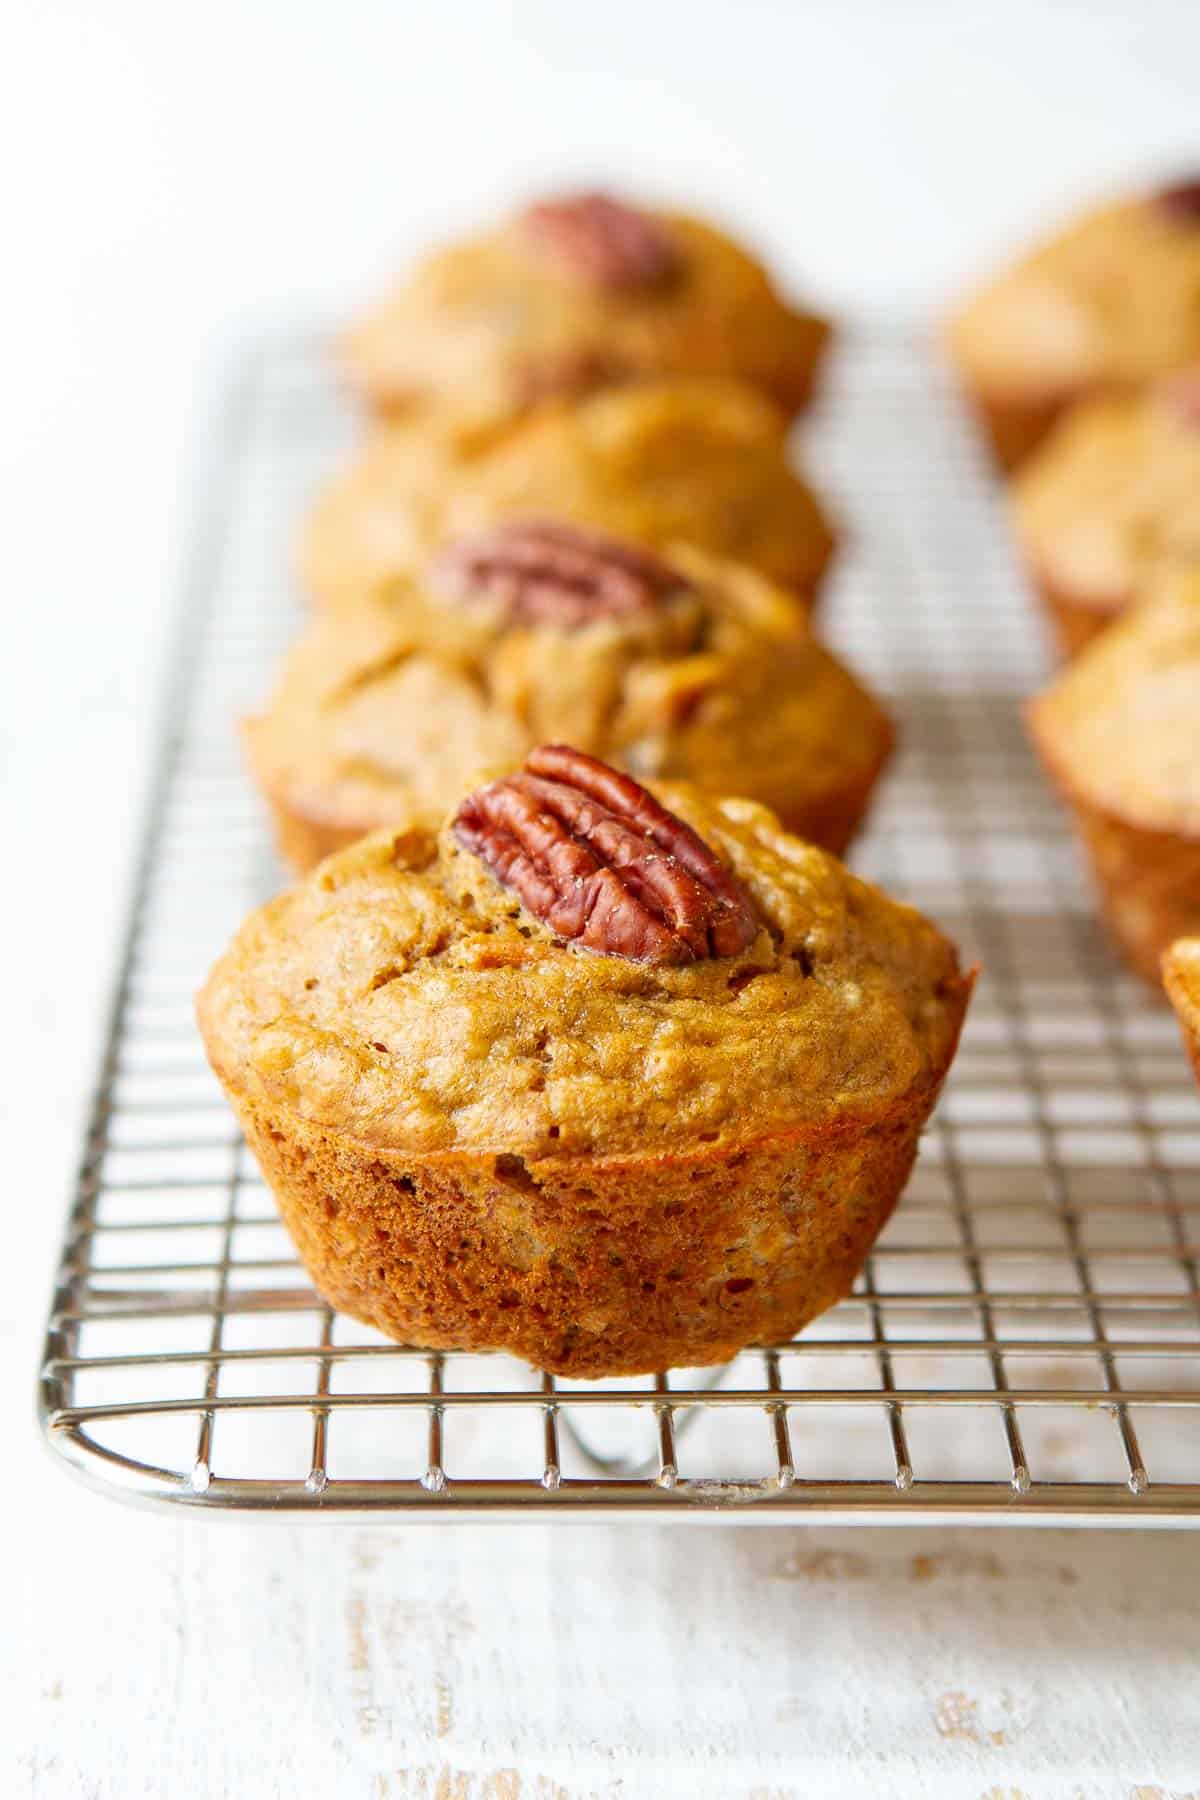 Banana carrot muffins topped with pecans on a wire rack.